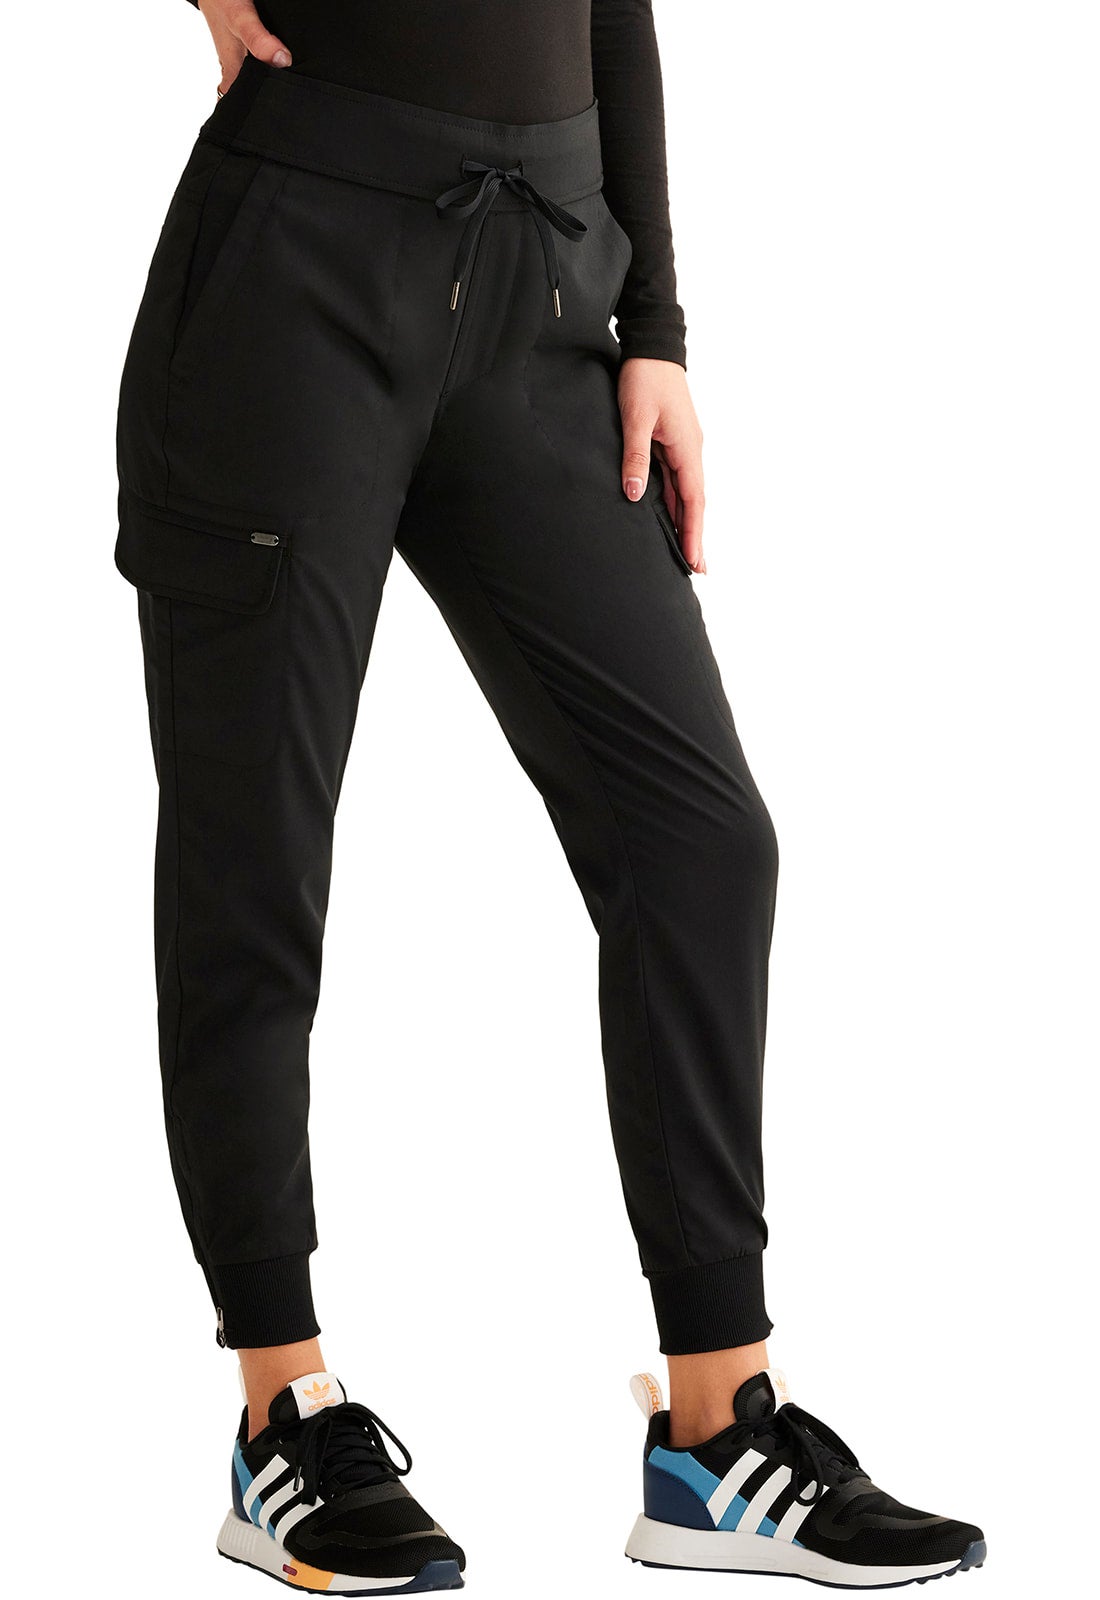 Clearance Limited Edition by Healing Hands Women's Kennedy Jogger